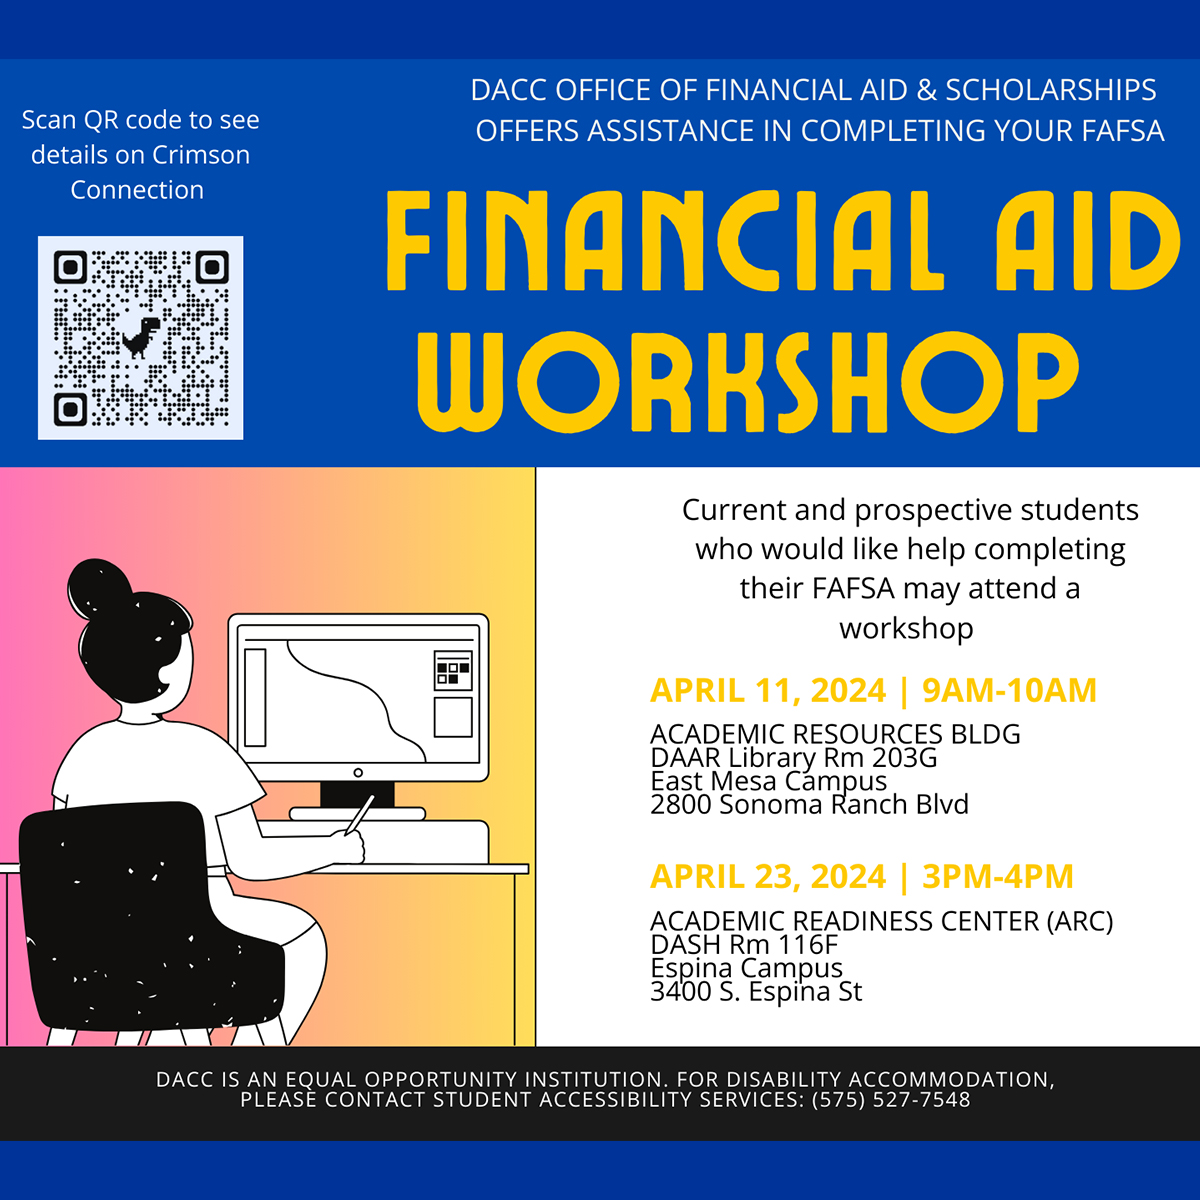 Join us at DACC Espina Campus (Academic Readiness Center ARC) for a Financial Aid Workshop on Tuesday, April 23, 2024, in Room 116F from 3:00 pm to 4:00 pm! Learn about financial aid options and how to apply. #WeAreDACC #FAFSA #Scholarships